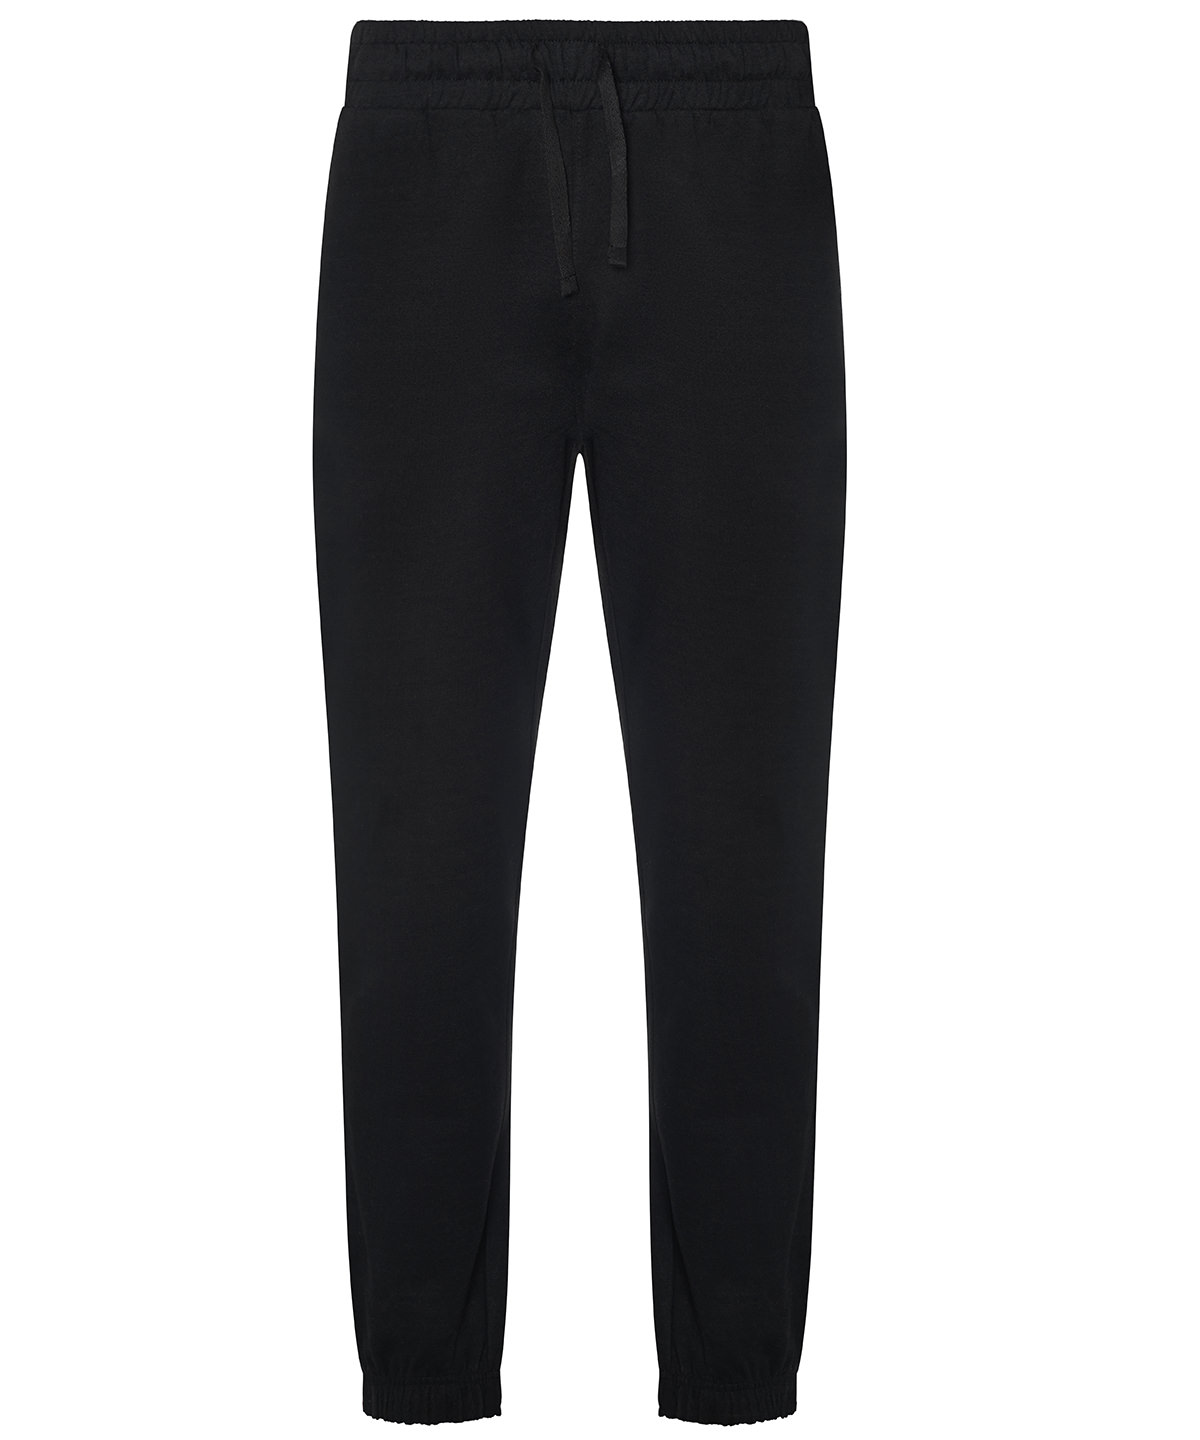 Crater Recycled Jog Pants Black Size XSmall